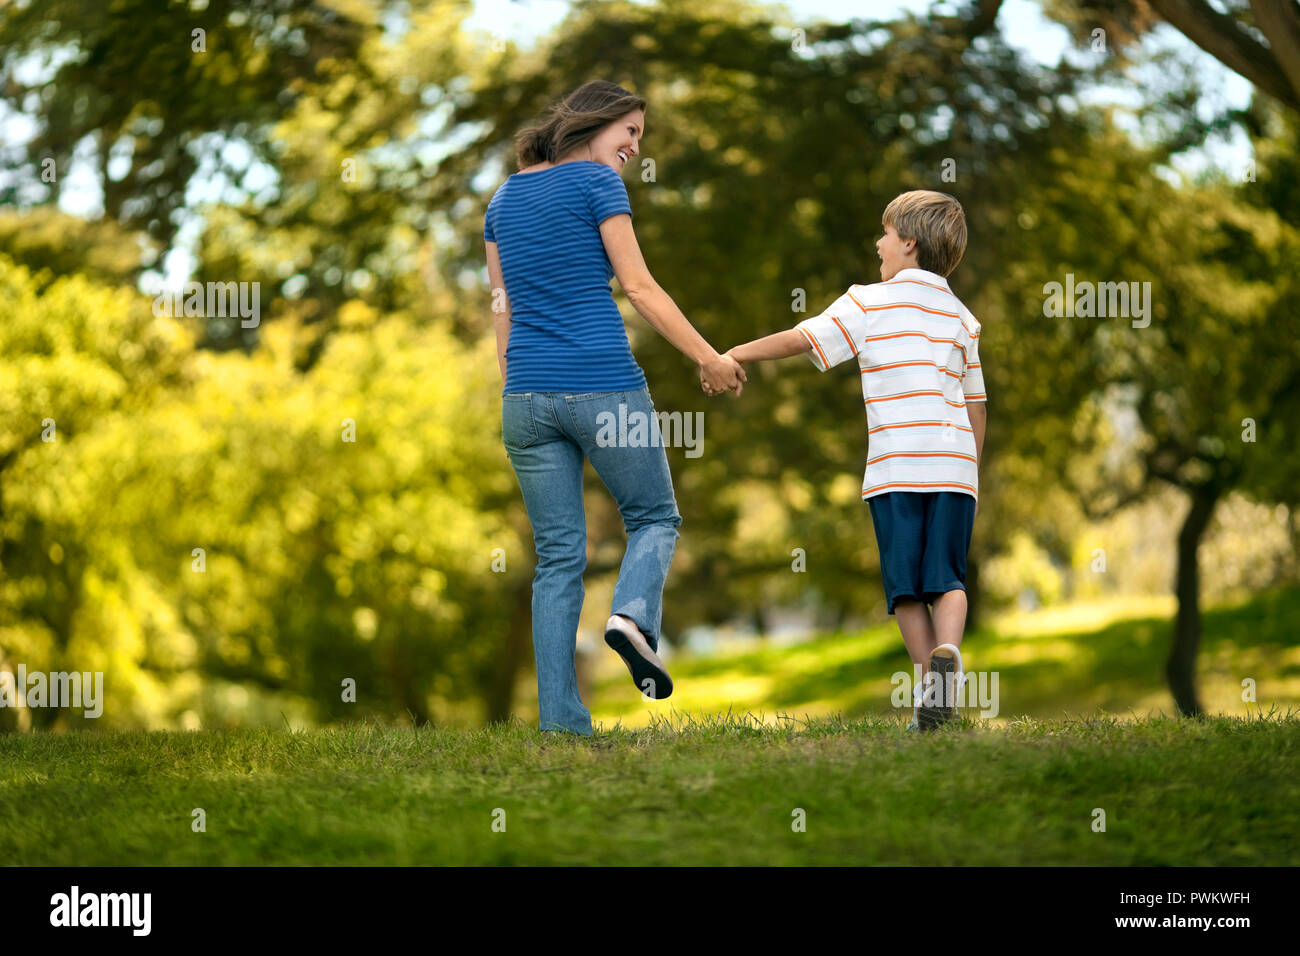 Mother and son playing in the park. Stock Photo